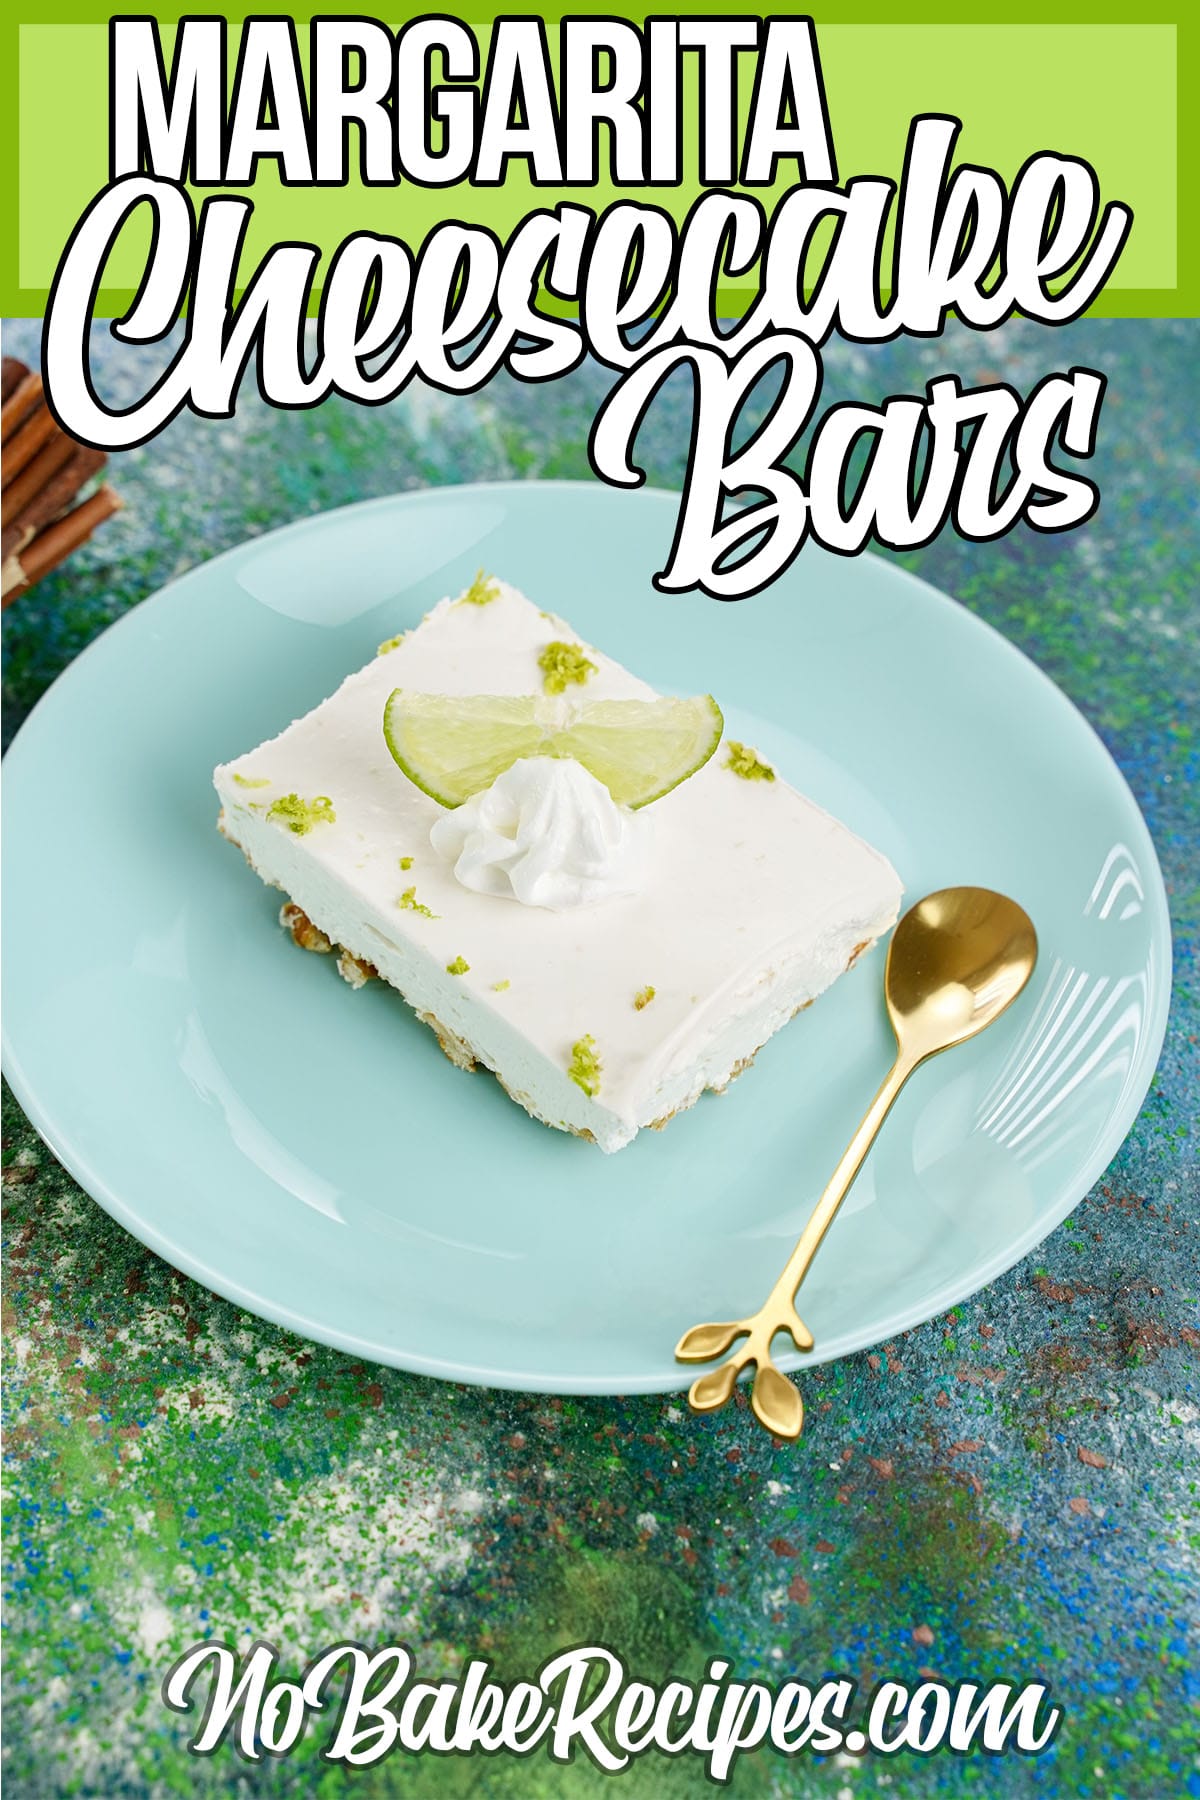 no bake cheesecake dessert on a plate with text which reads margarita cheesecake bars